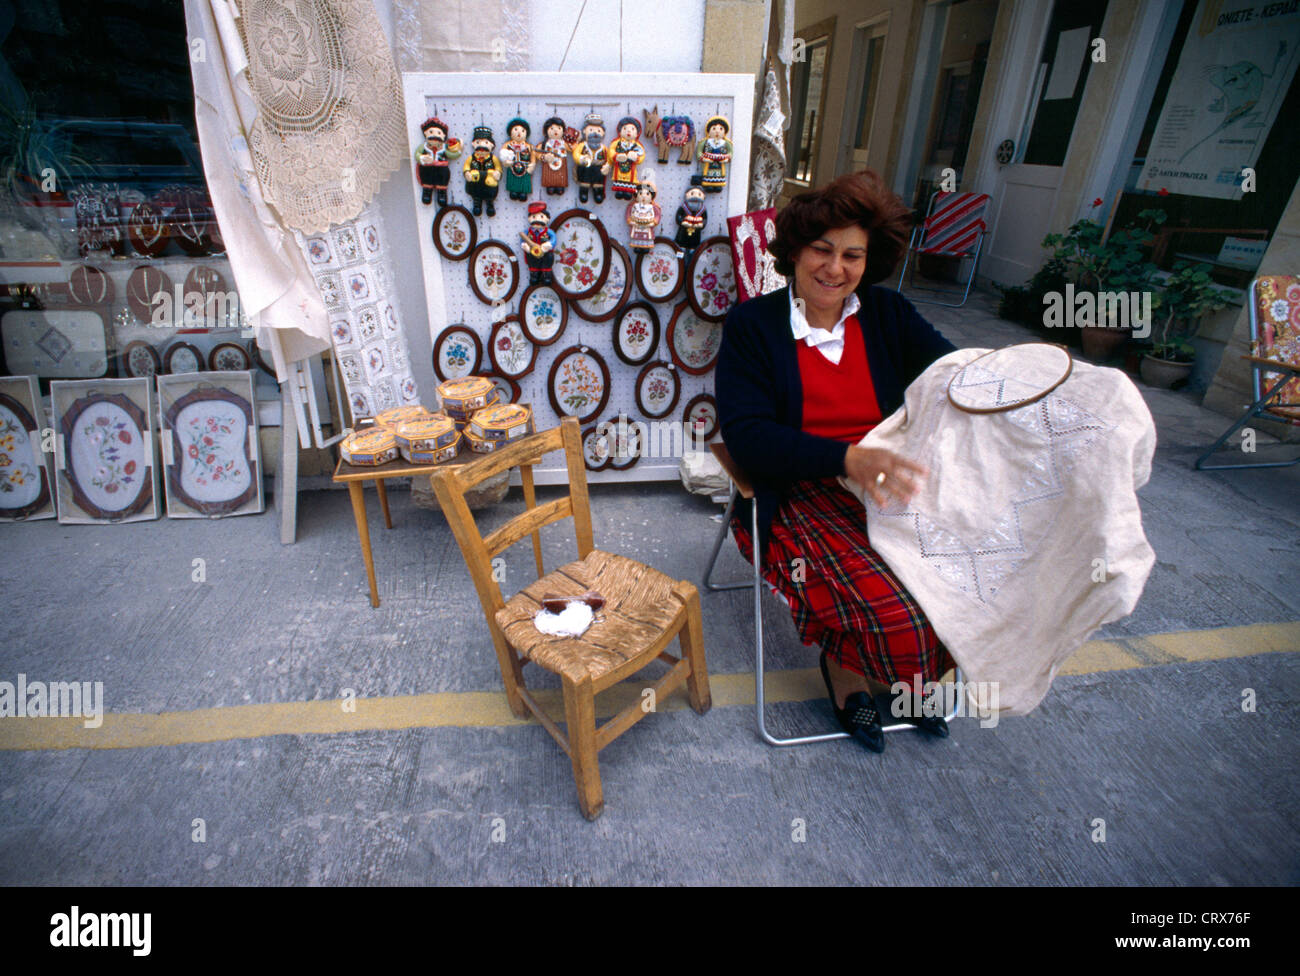 Lefkara Cyprus Handmade Lace Woman Sewing On Chair In Street Stock Photo